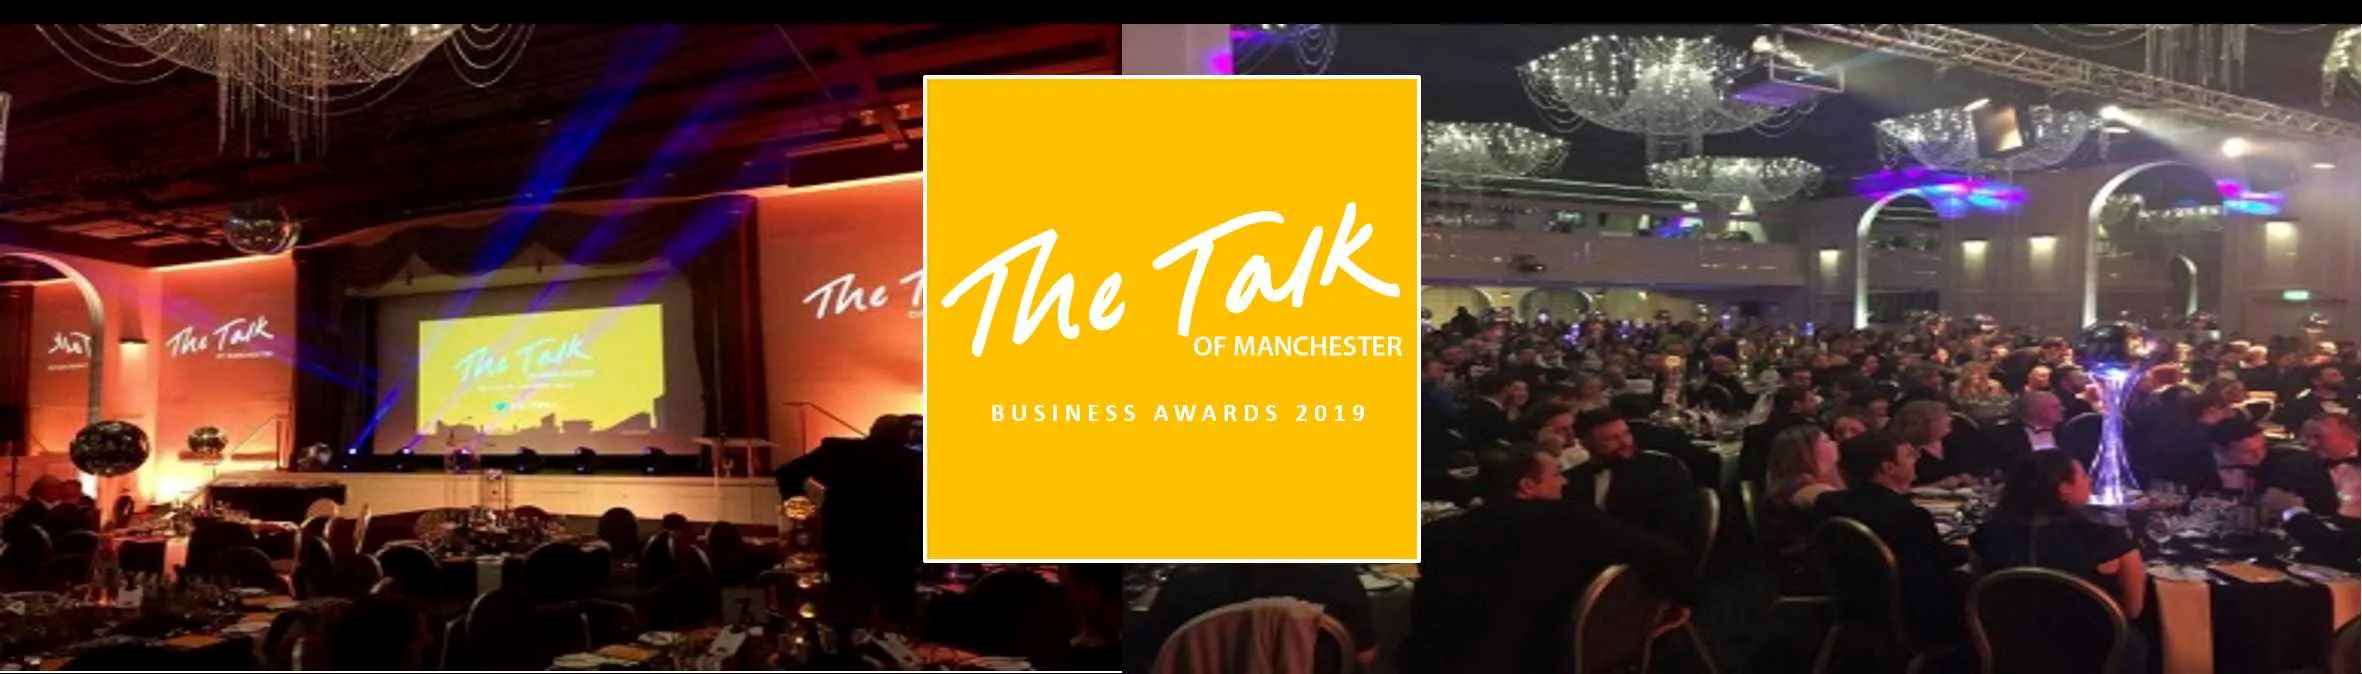 ETL GLOBAL´s two UK Partners were recognised at The Talk of Manchester Business Awards 2019